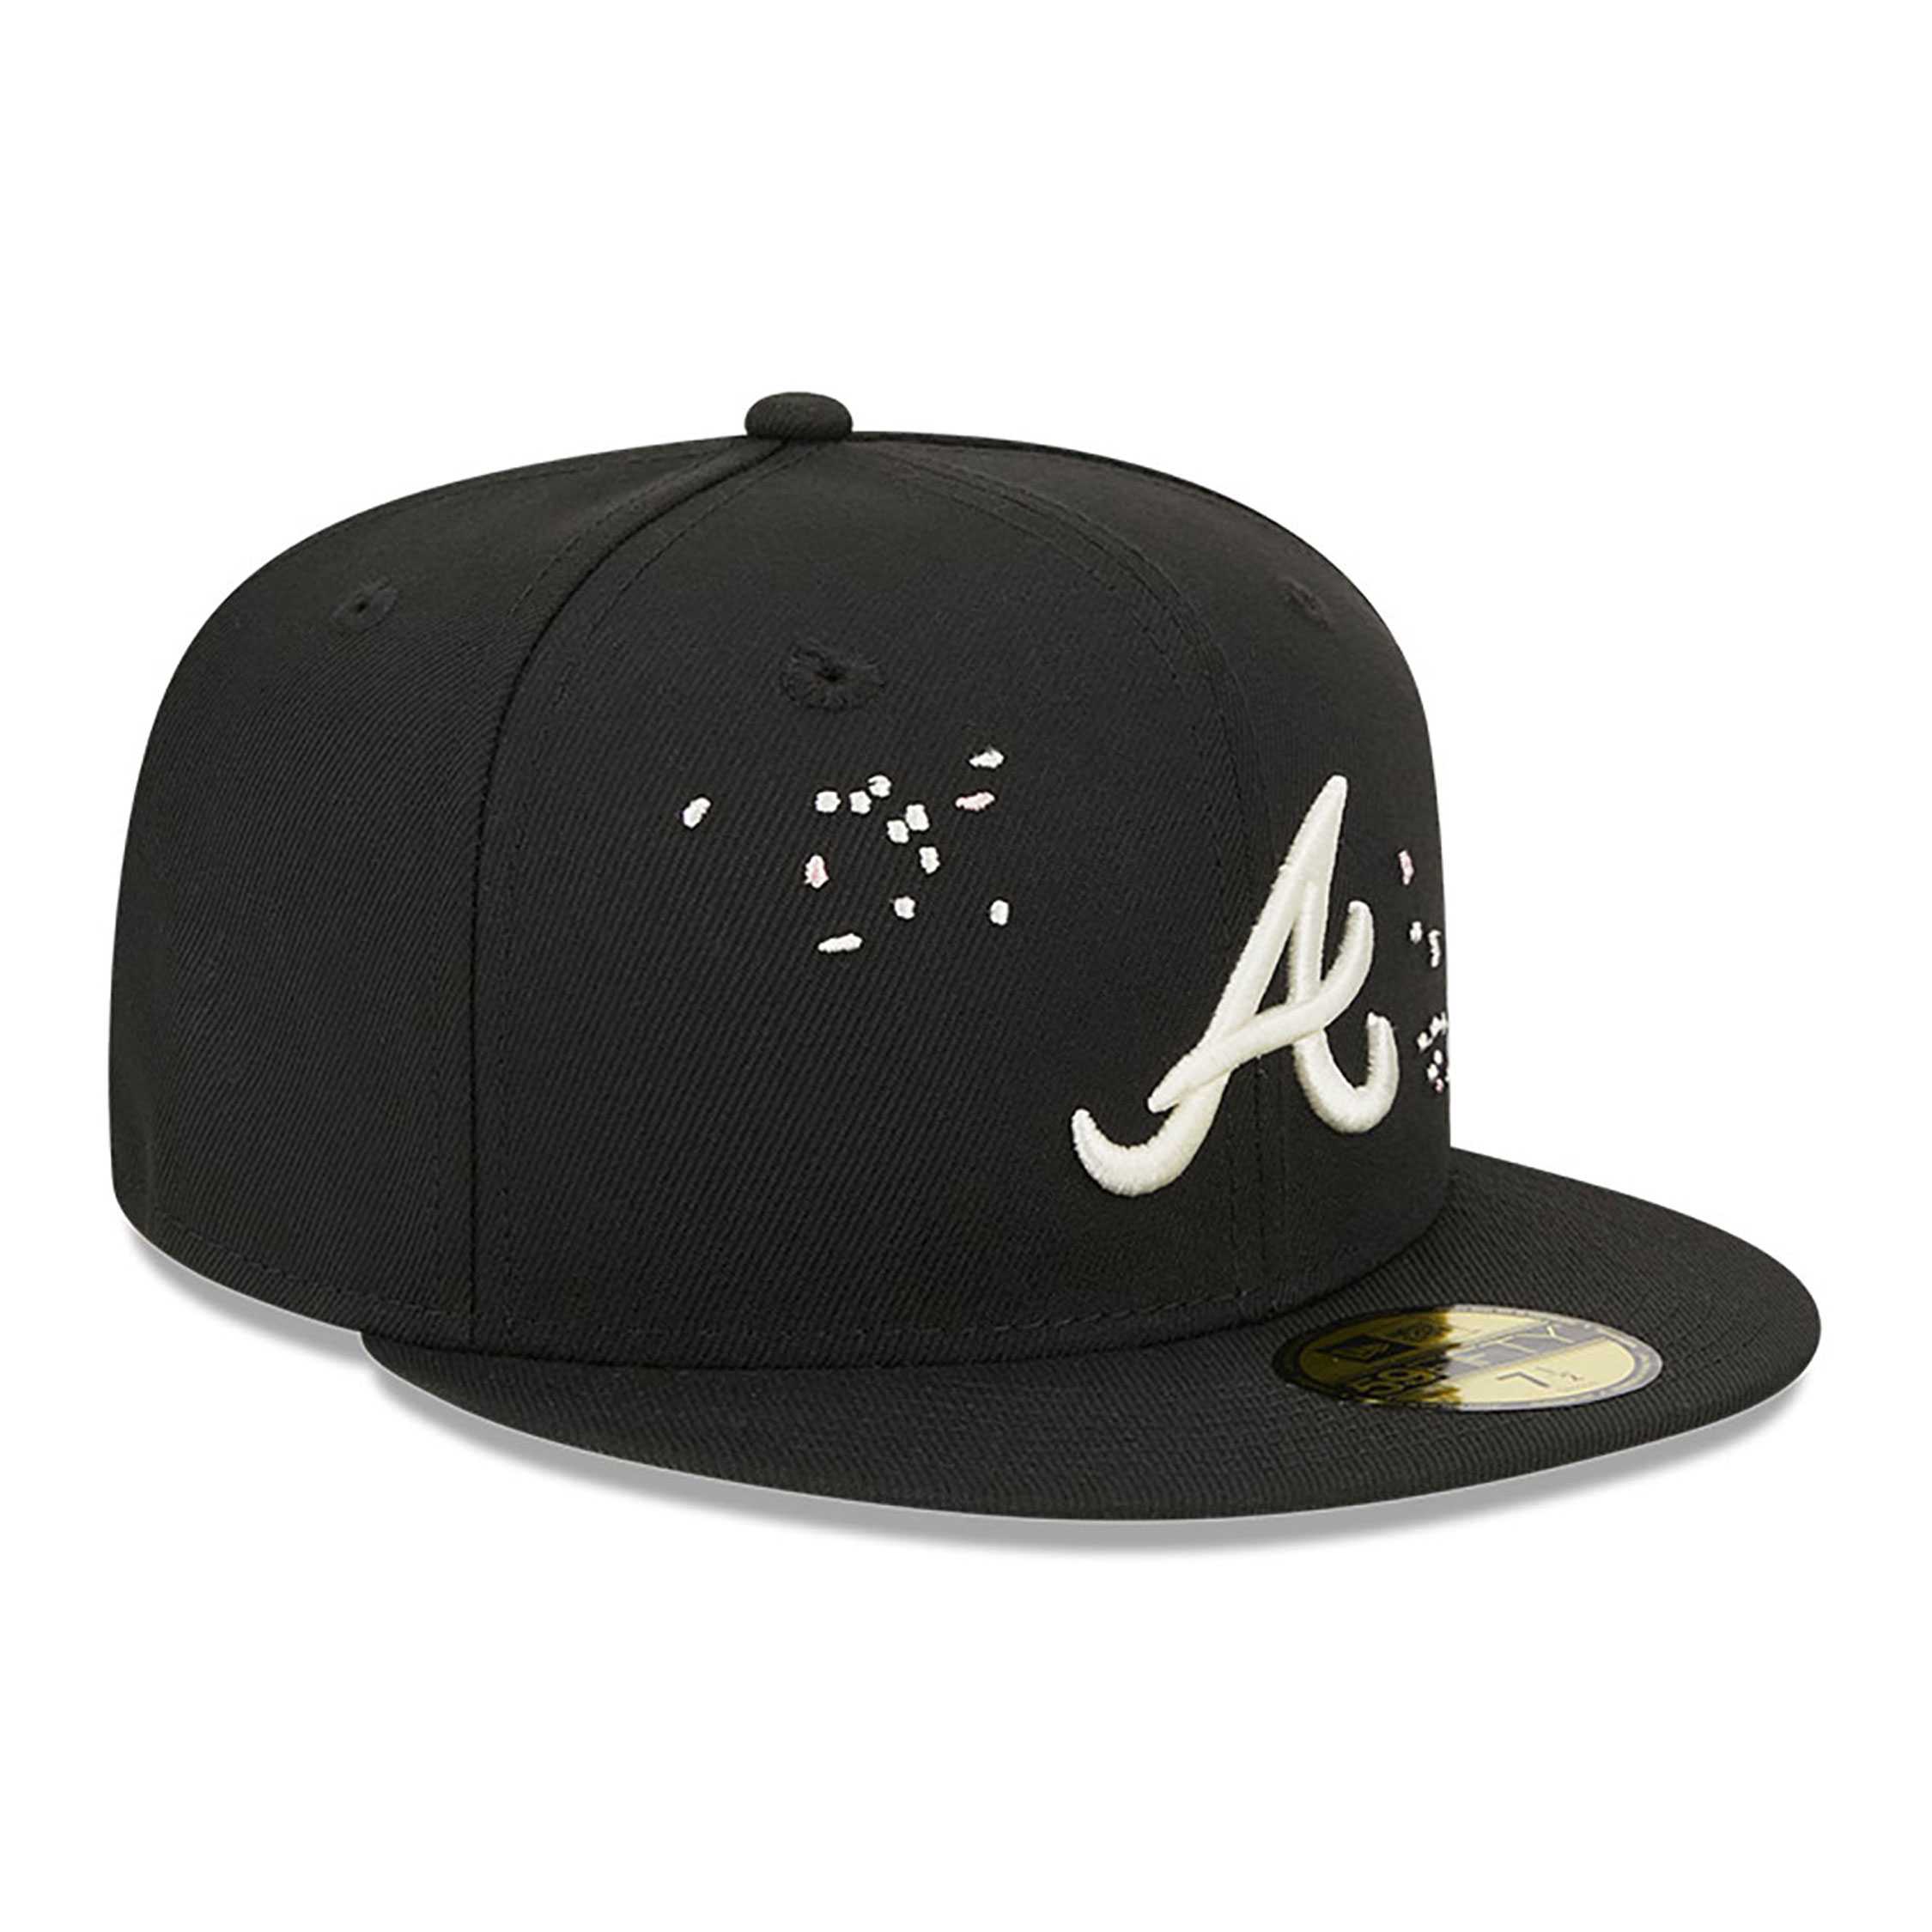 Atlanta Braves Cherry Blossom Black 59FIFTY Fitted Cap